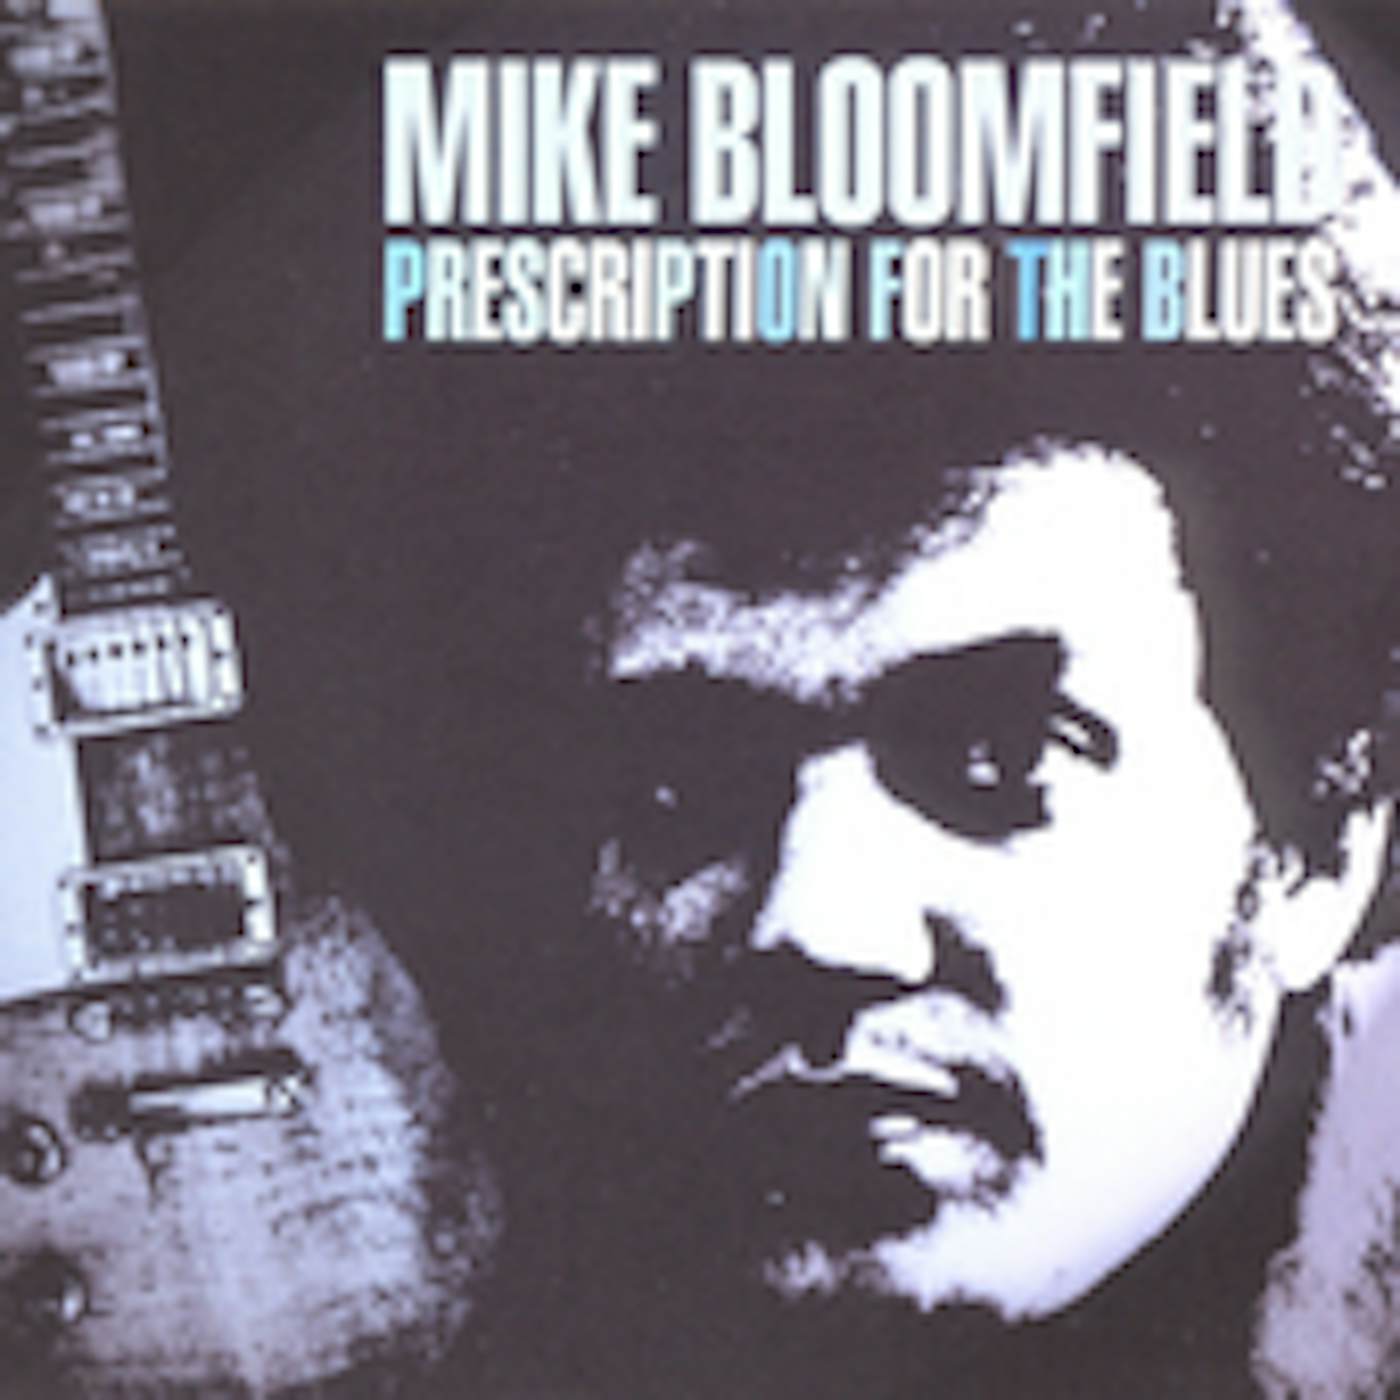 Mike Bloomfield PRESCRIPTION FOR THE BLUES CD